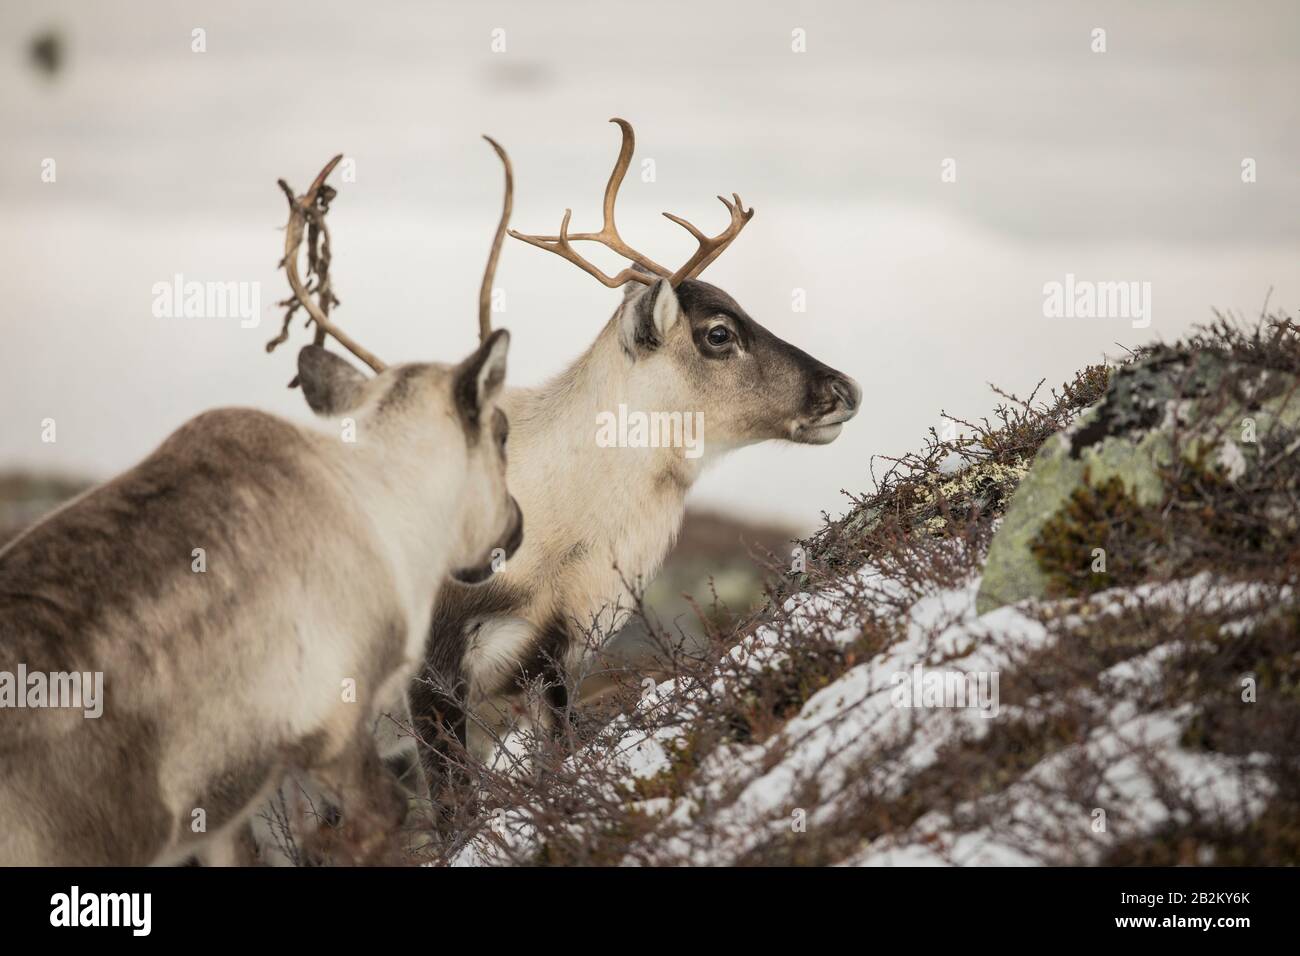 Reindeer in Spitsbergen, Svalbard in beautiful surroundings. Snow and winter landscape with exotic animals, living in hash environments all year round Stock Photo